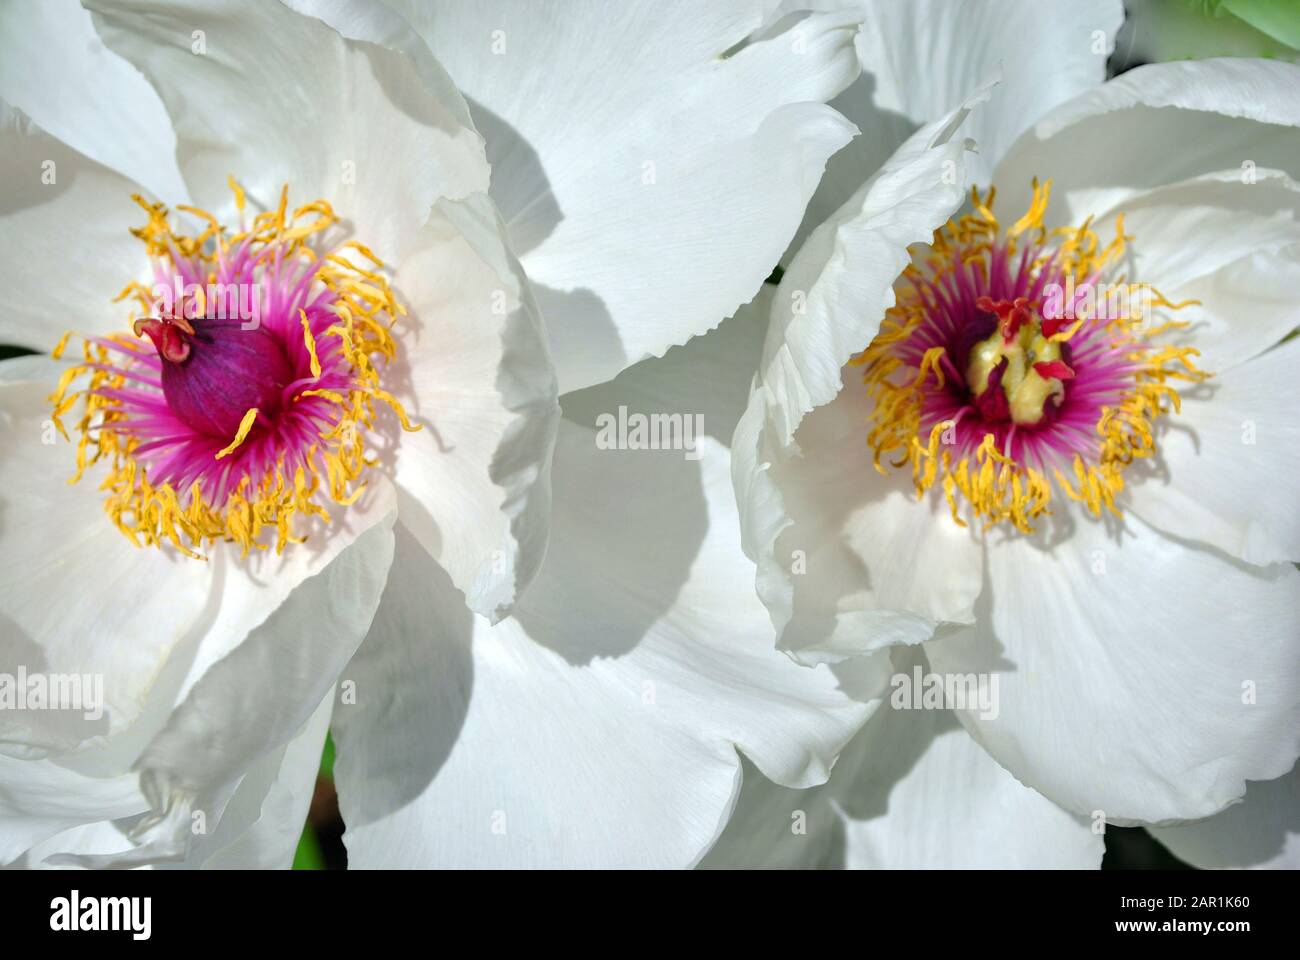 Couple white peony flowers, close up detail of pink and yellow pestle, soft background Stock Photo